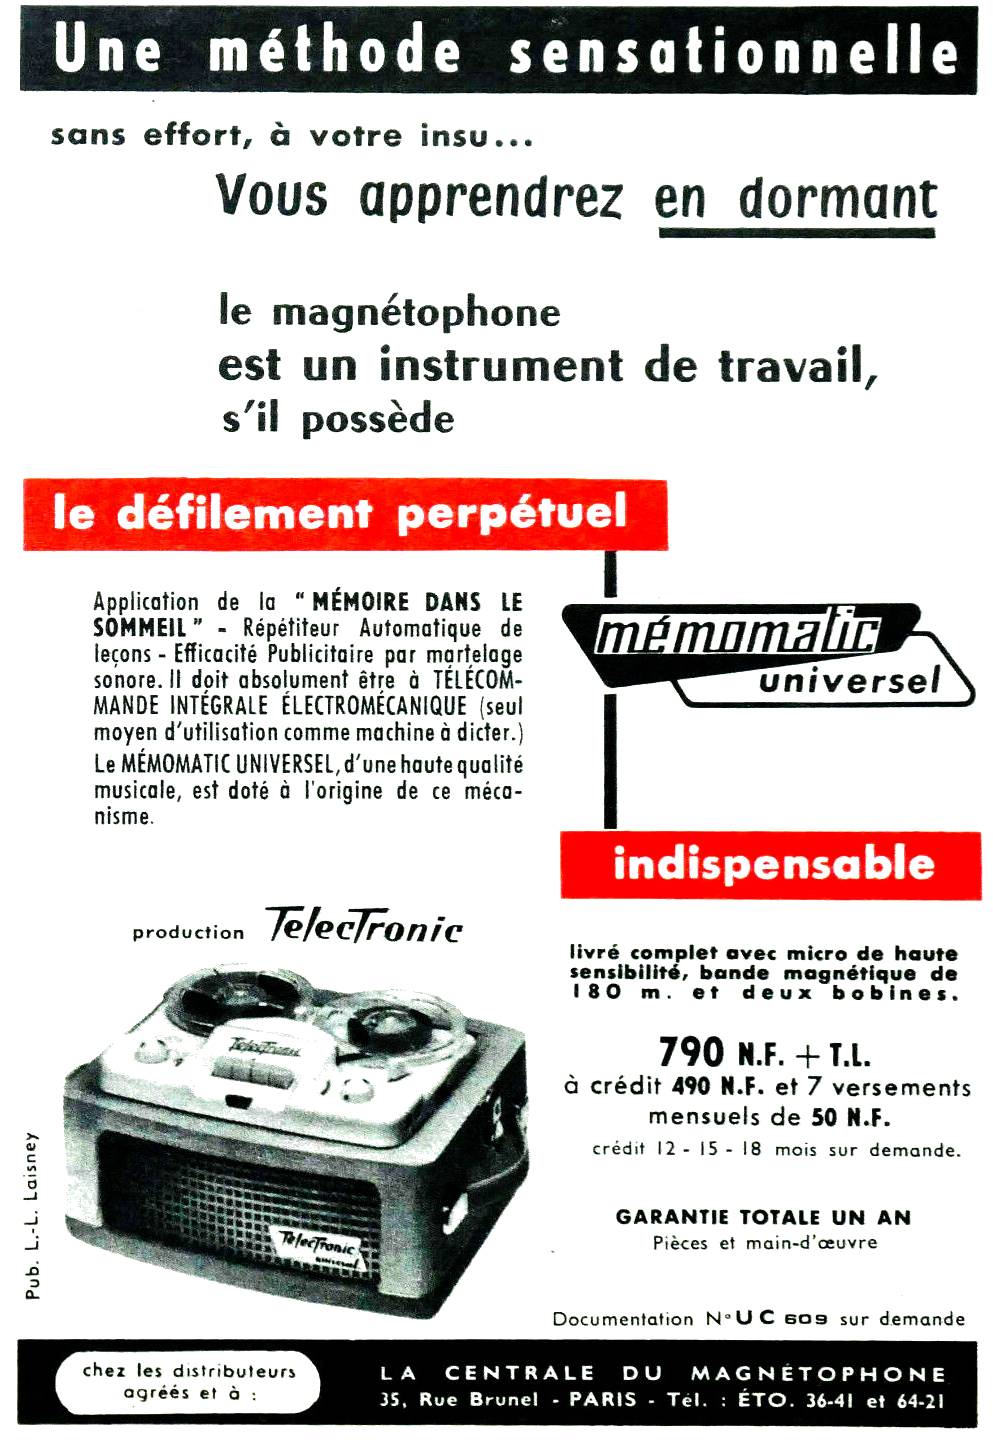 Publicite_magnetophone_Telectronic-Memomatic_09-1960.jpg